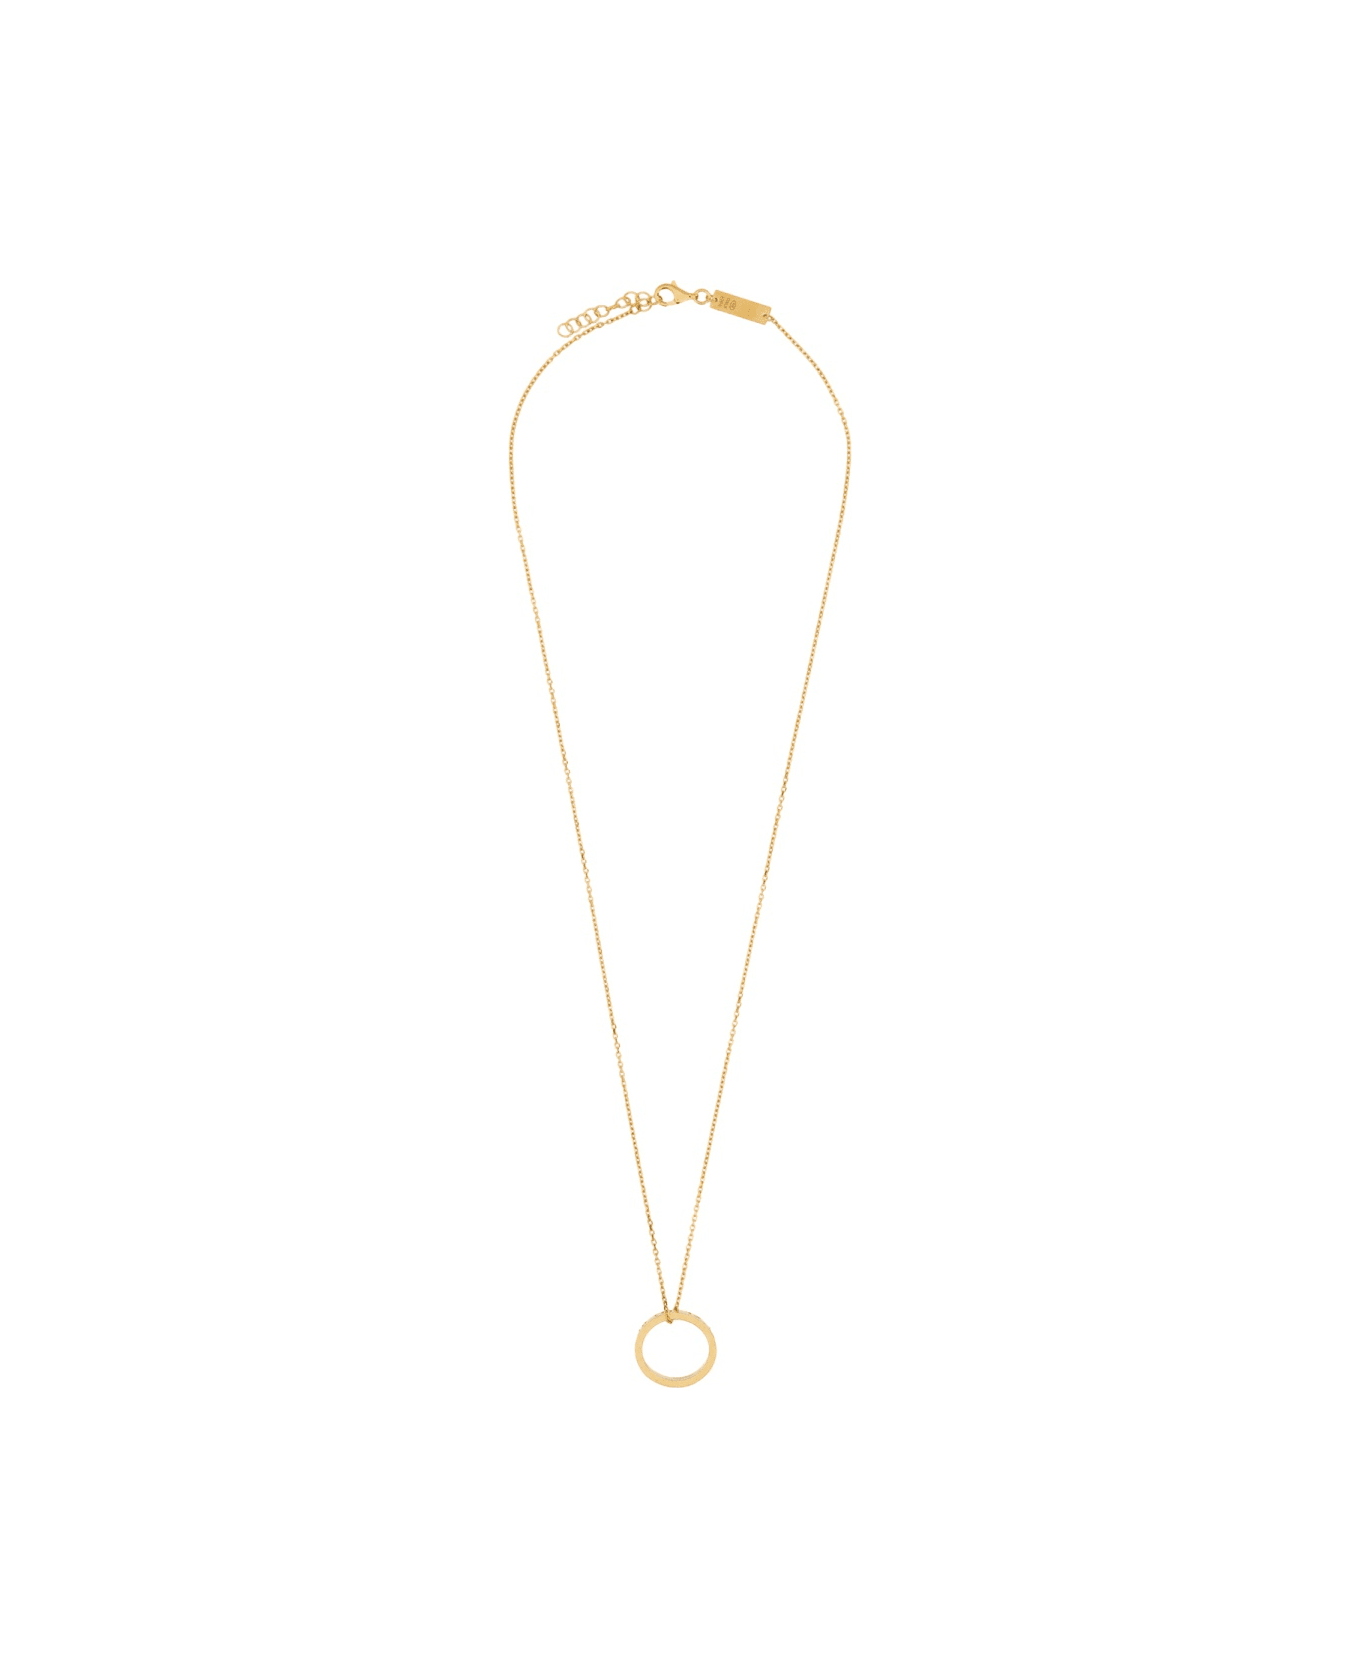 Maison Margiela Number Ring Necklace - GOLD ネックレス